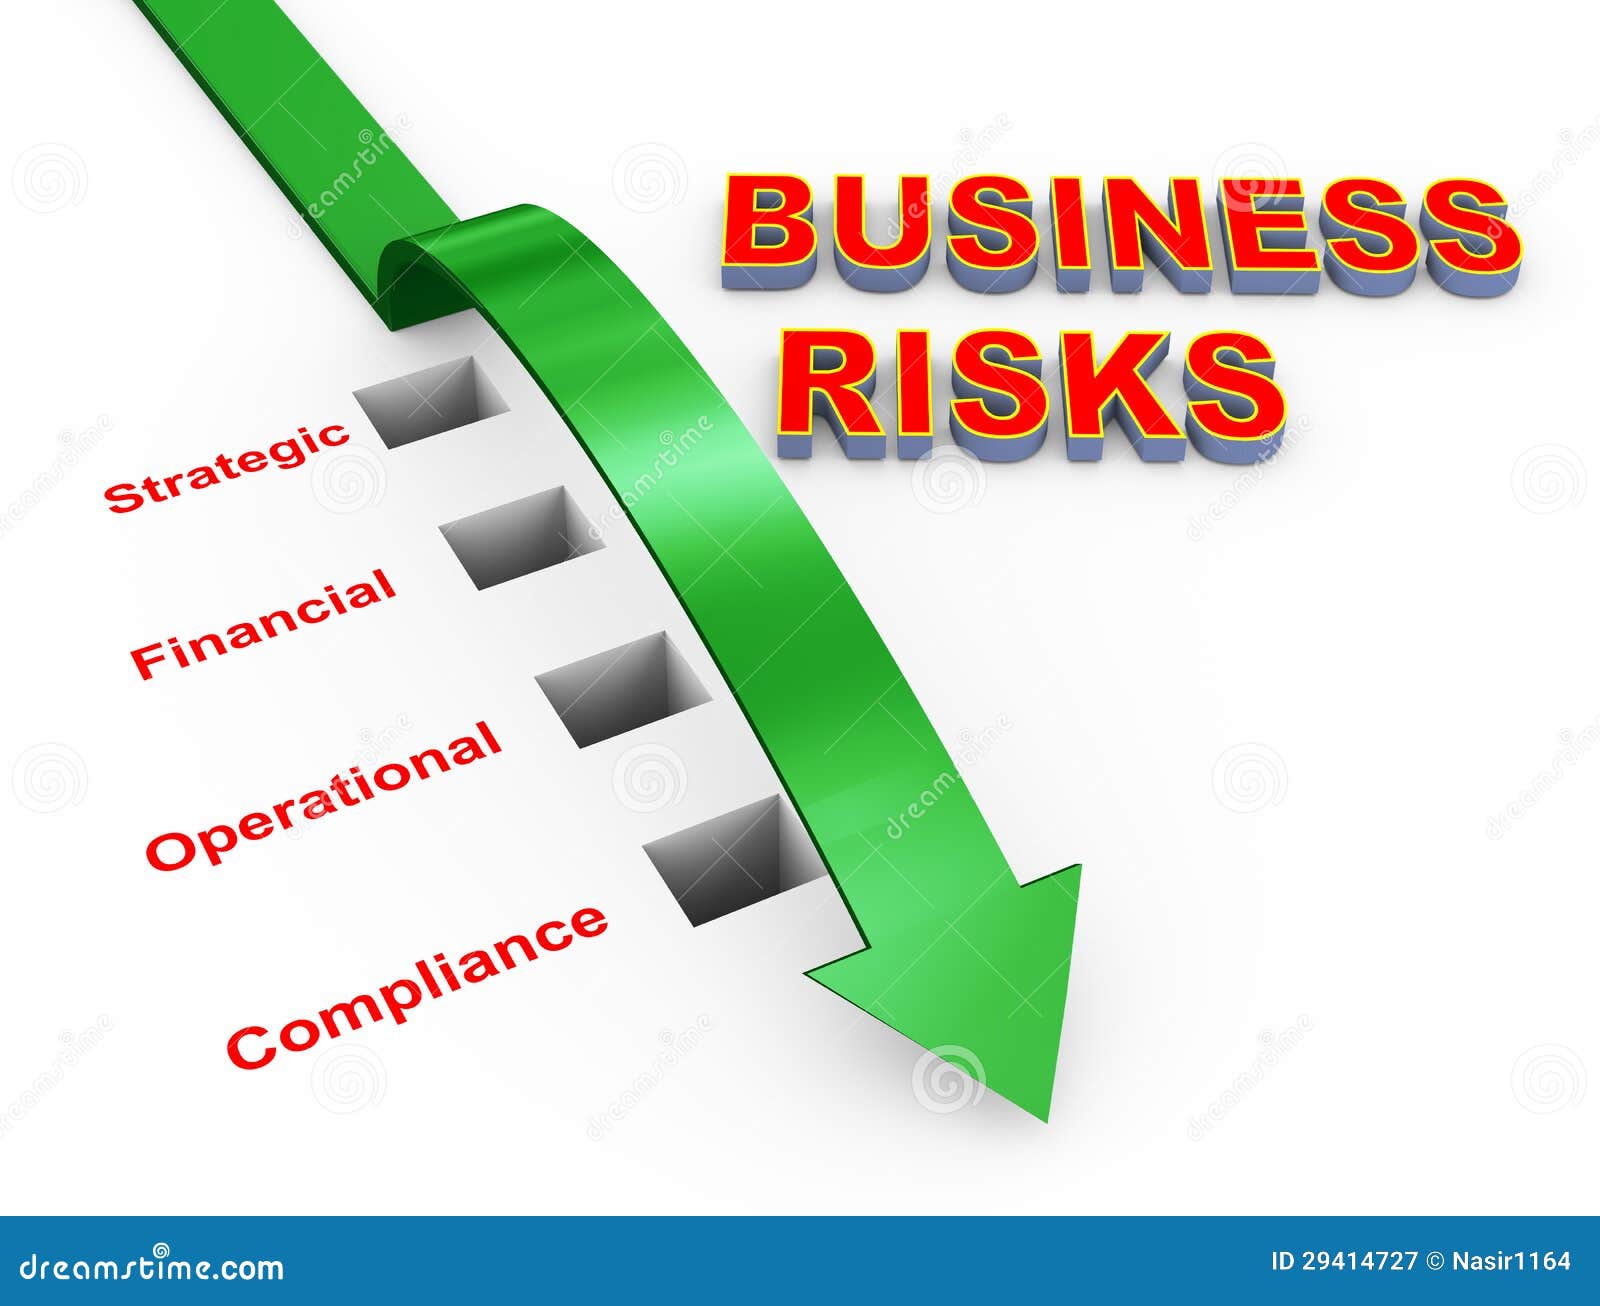 business risk clipart - photo #38